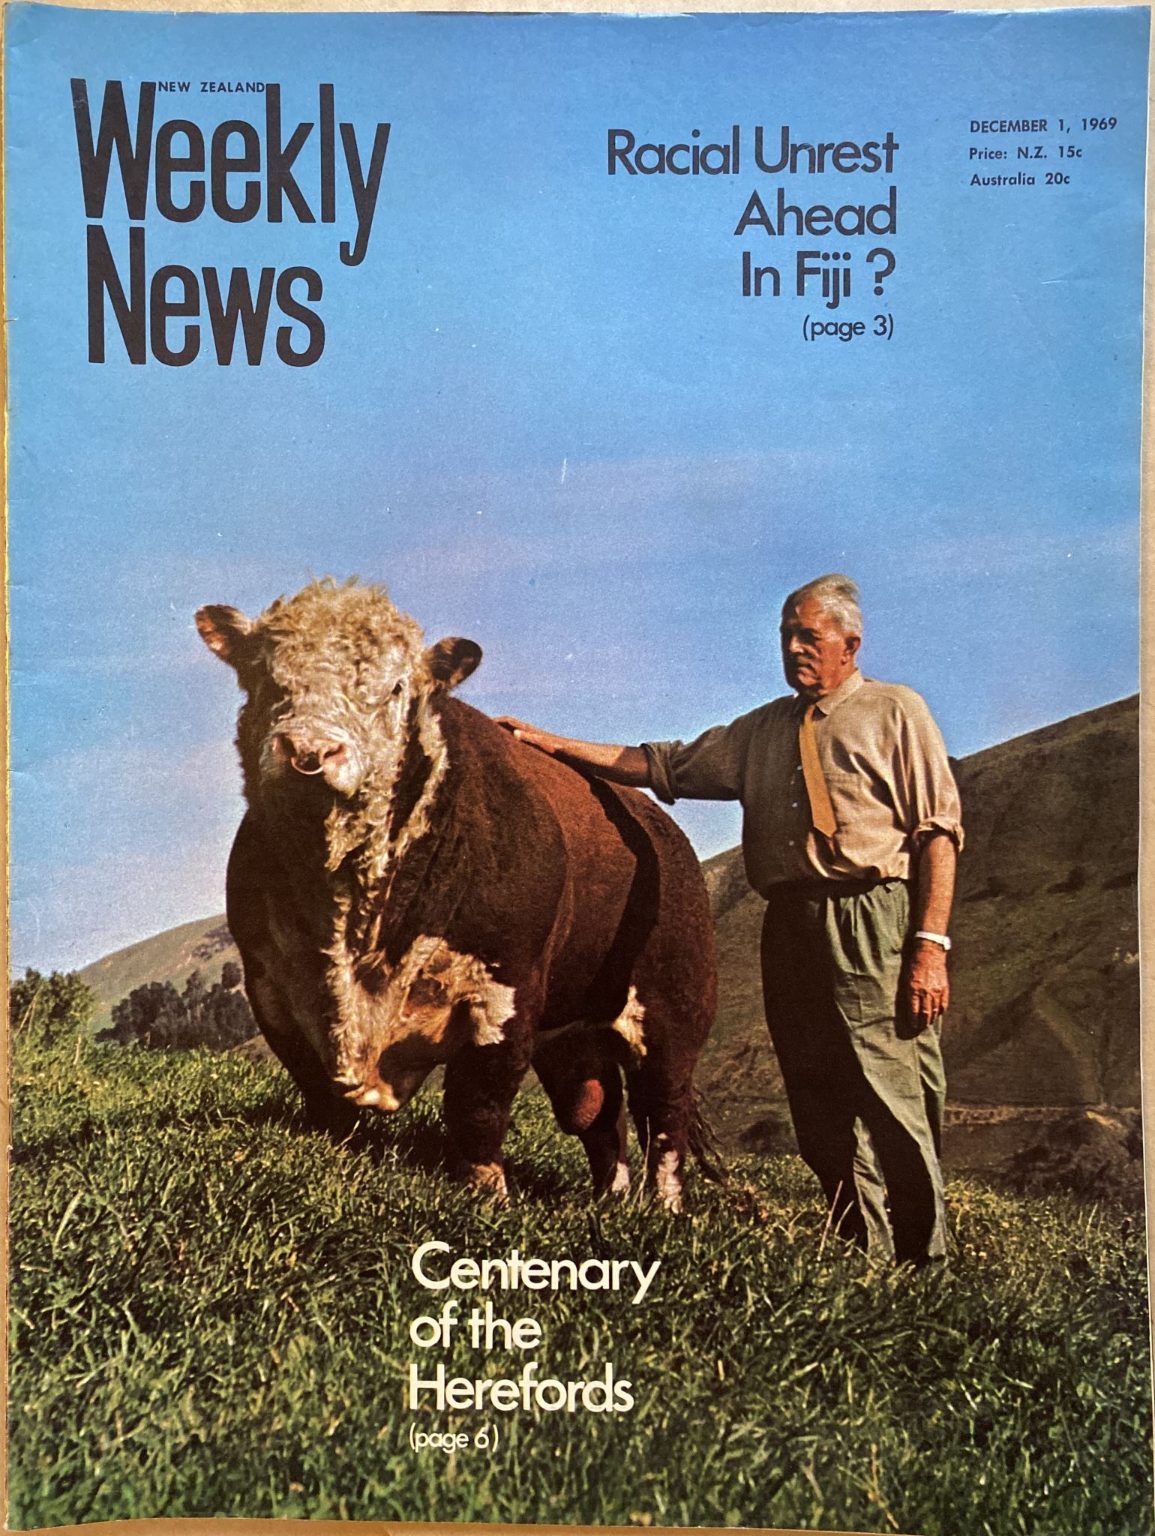 OLD NEWSPAPER: New Zealand Weekly News, No. 5531, 1 December 1969